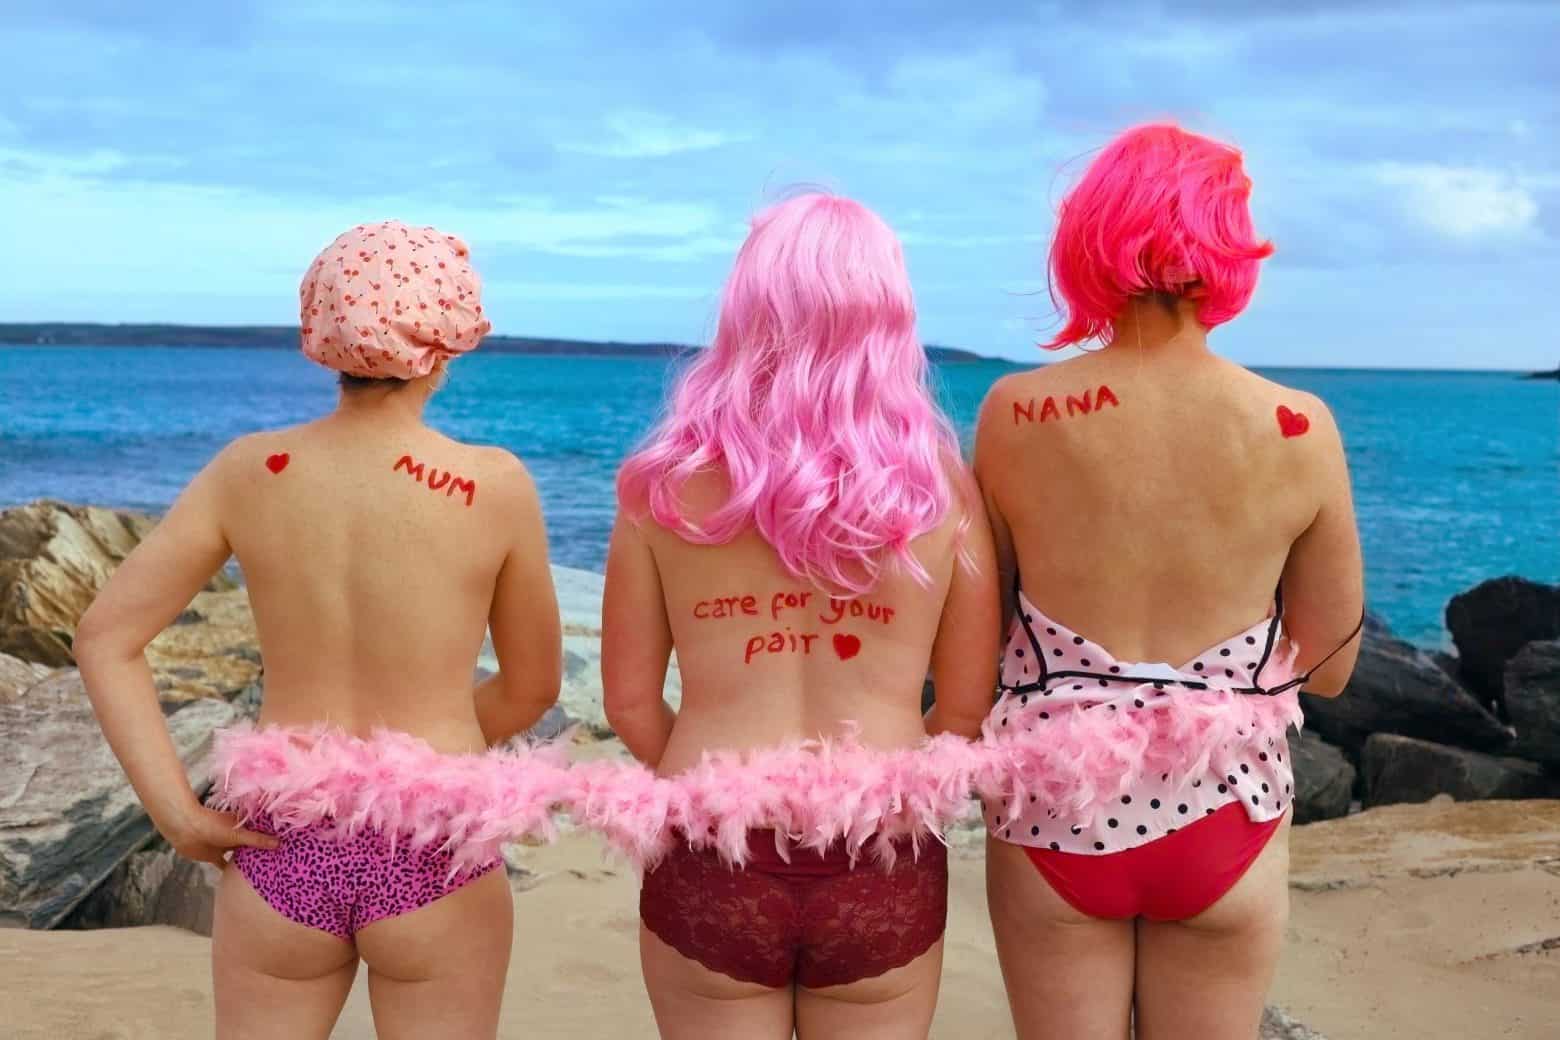 There's a pink knickers swim for breast cancer awareness at